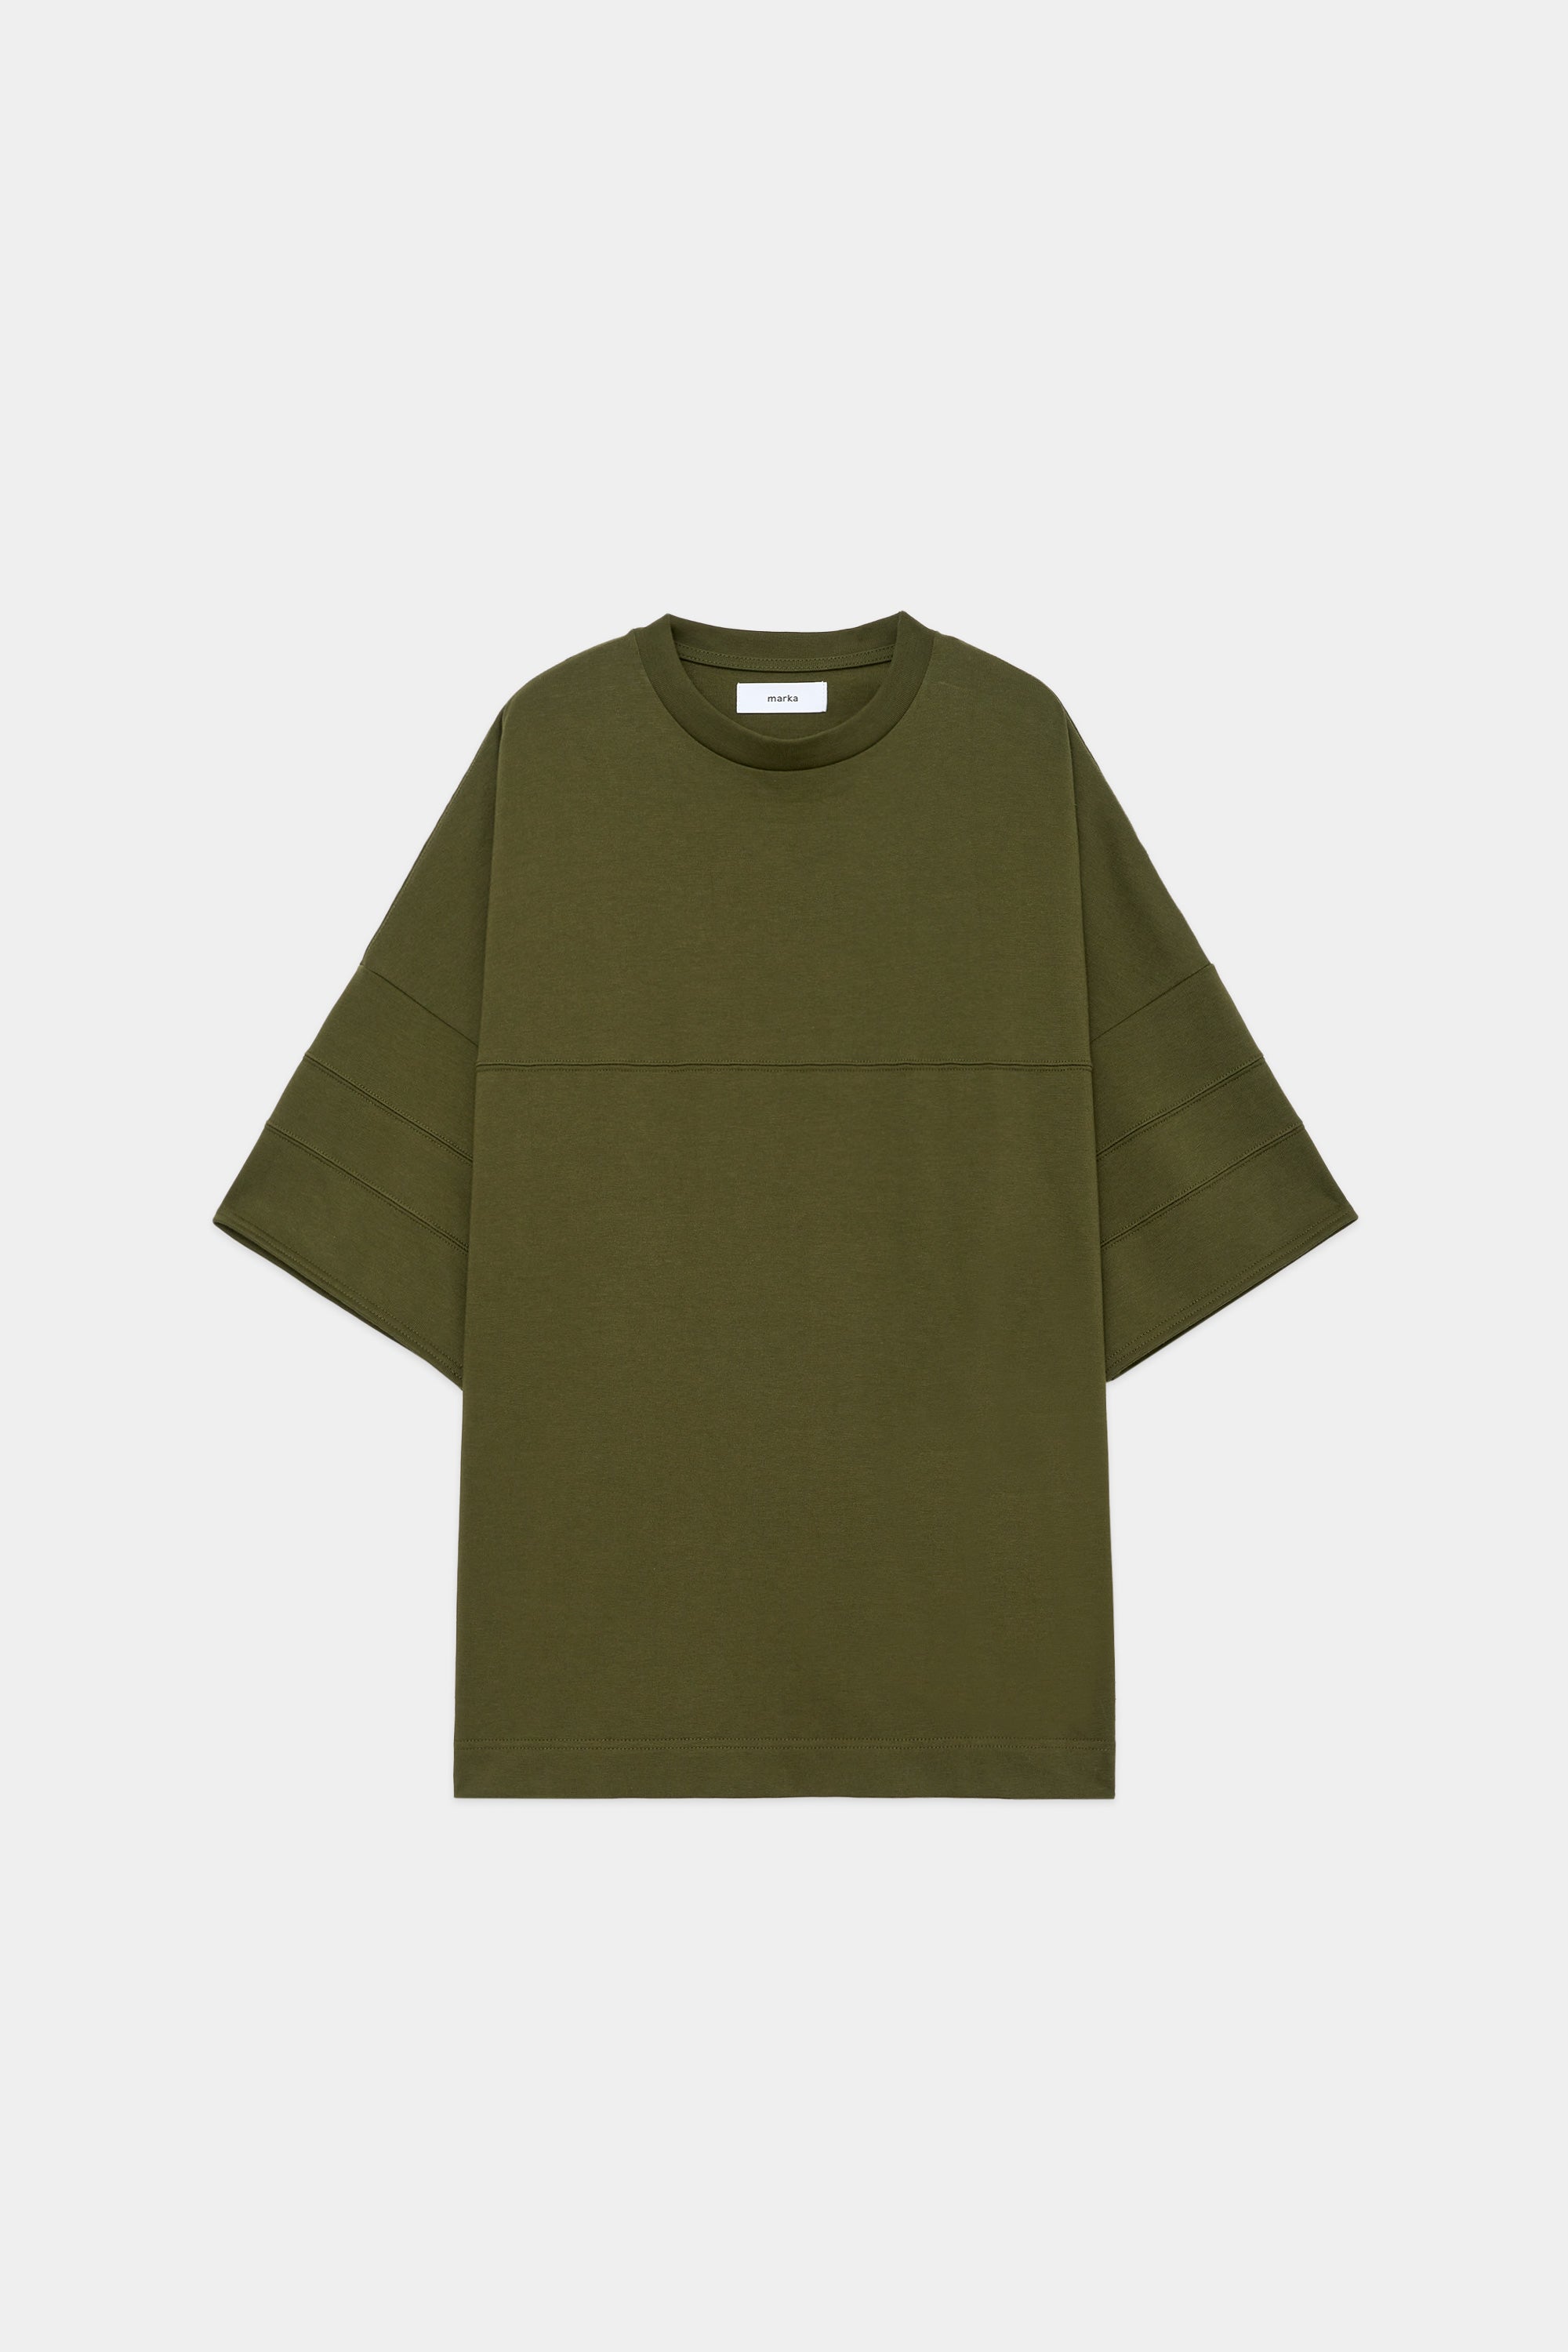 20//1 RECYCLE SUVIN ORGANIC COTTON KNIT FOOTBALL TEE WIDE, Olive